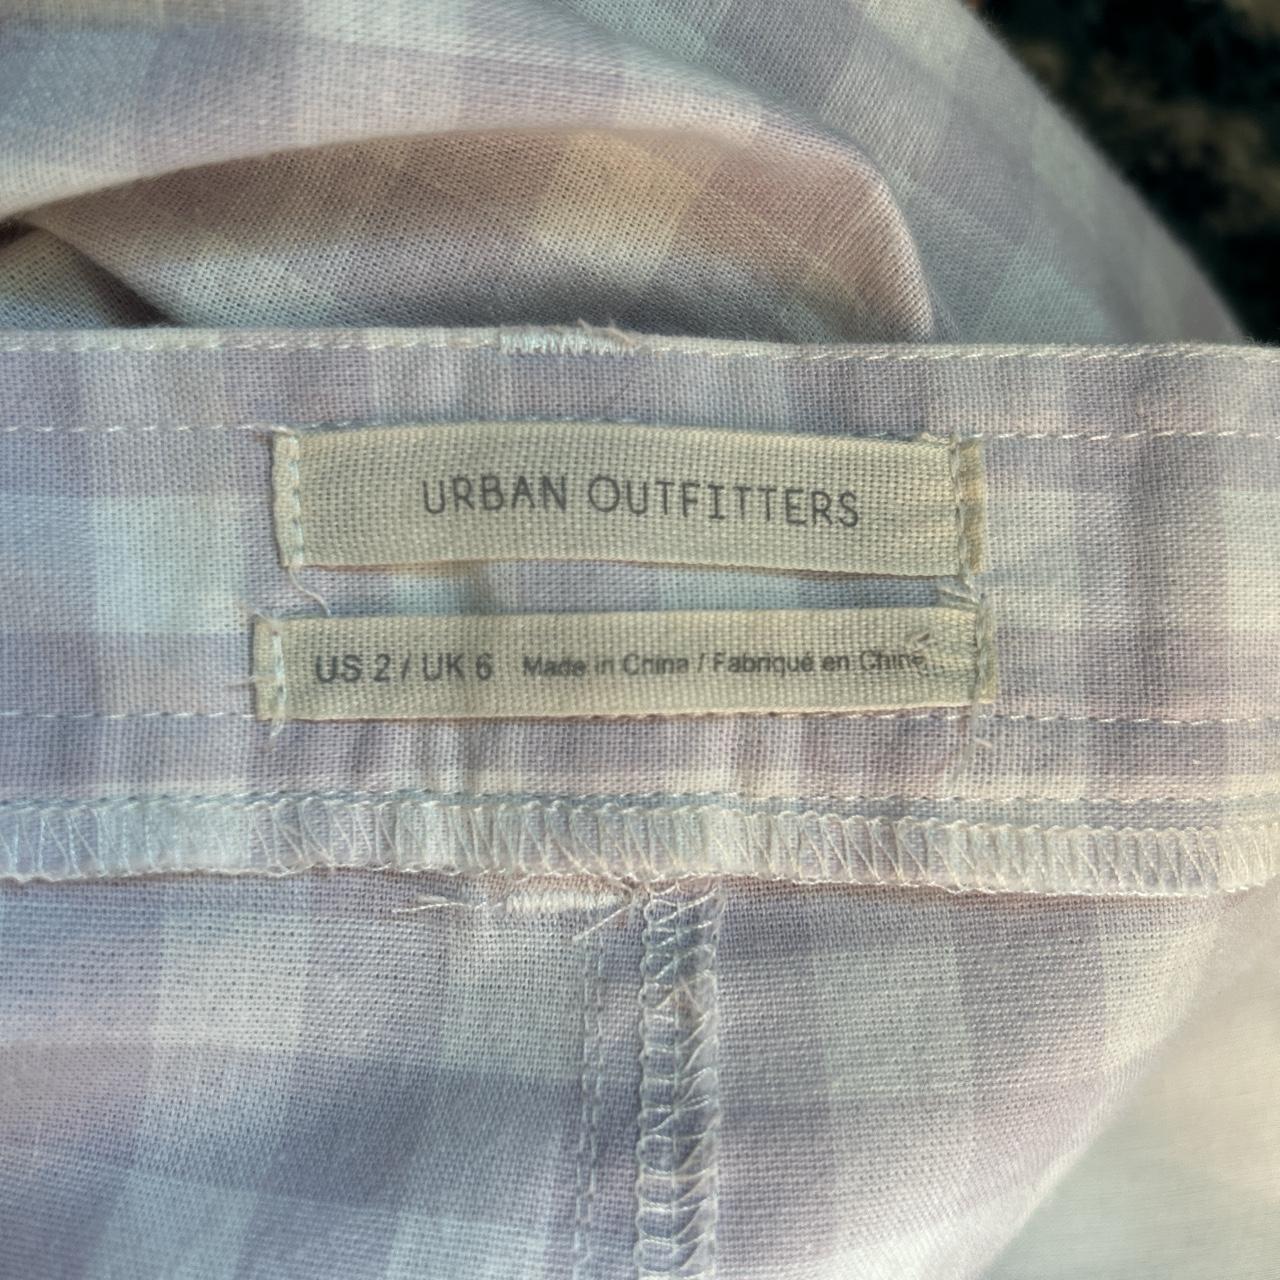 Urban Outfitters Women's White and Purple Trousers | Depop